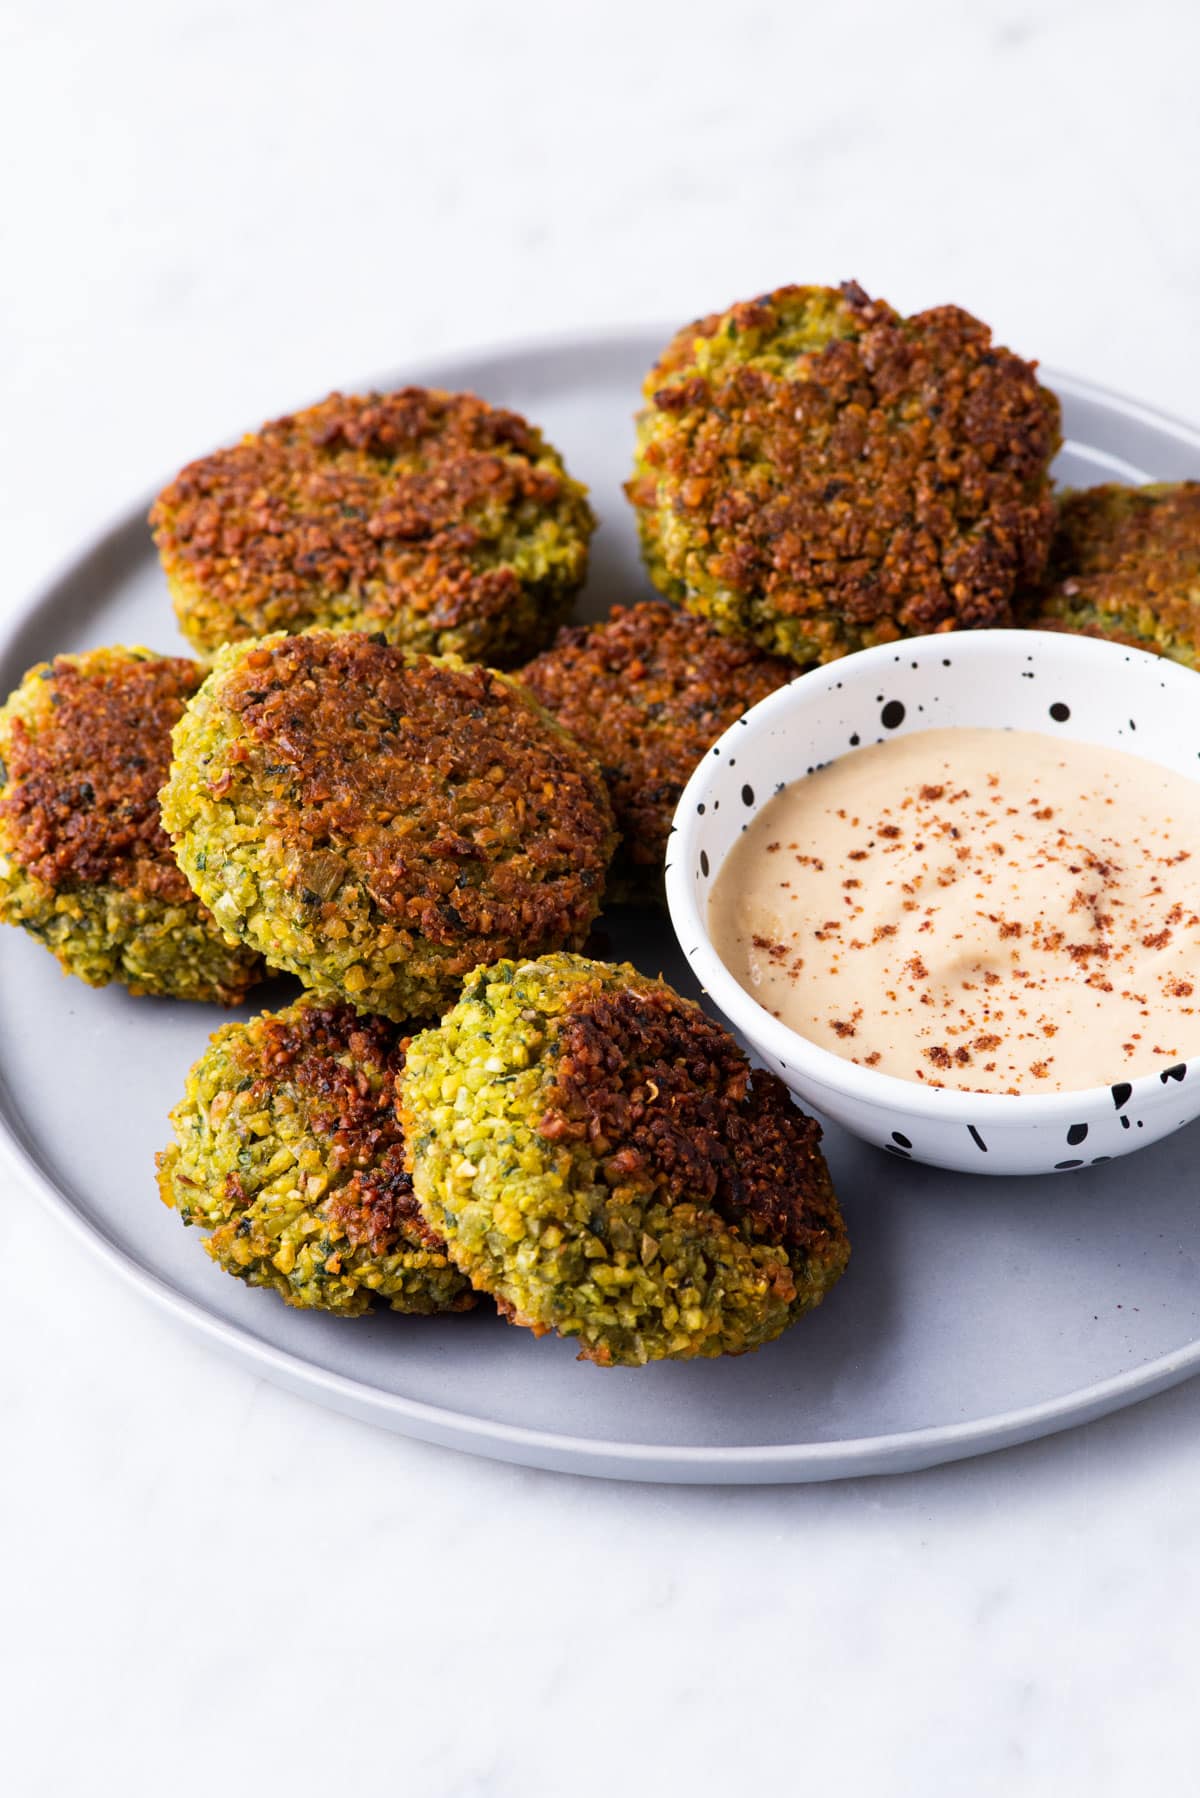 Baked falafel patties on a gray plate next to tahini sauce.